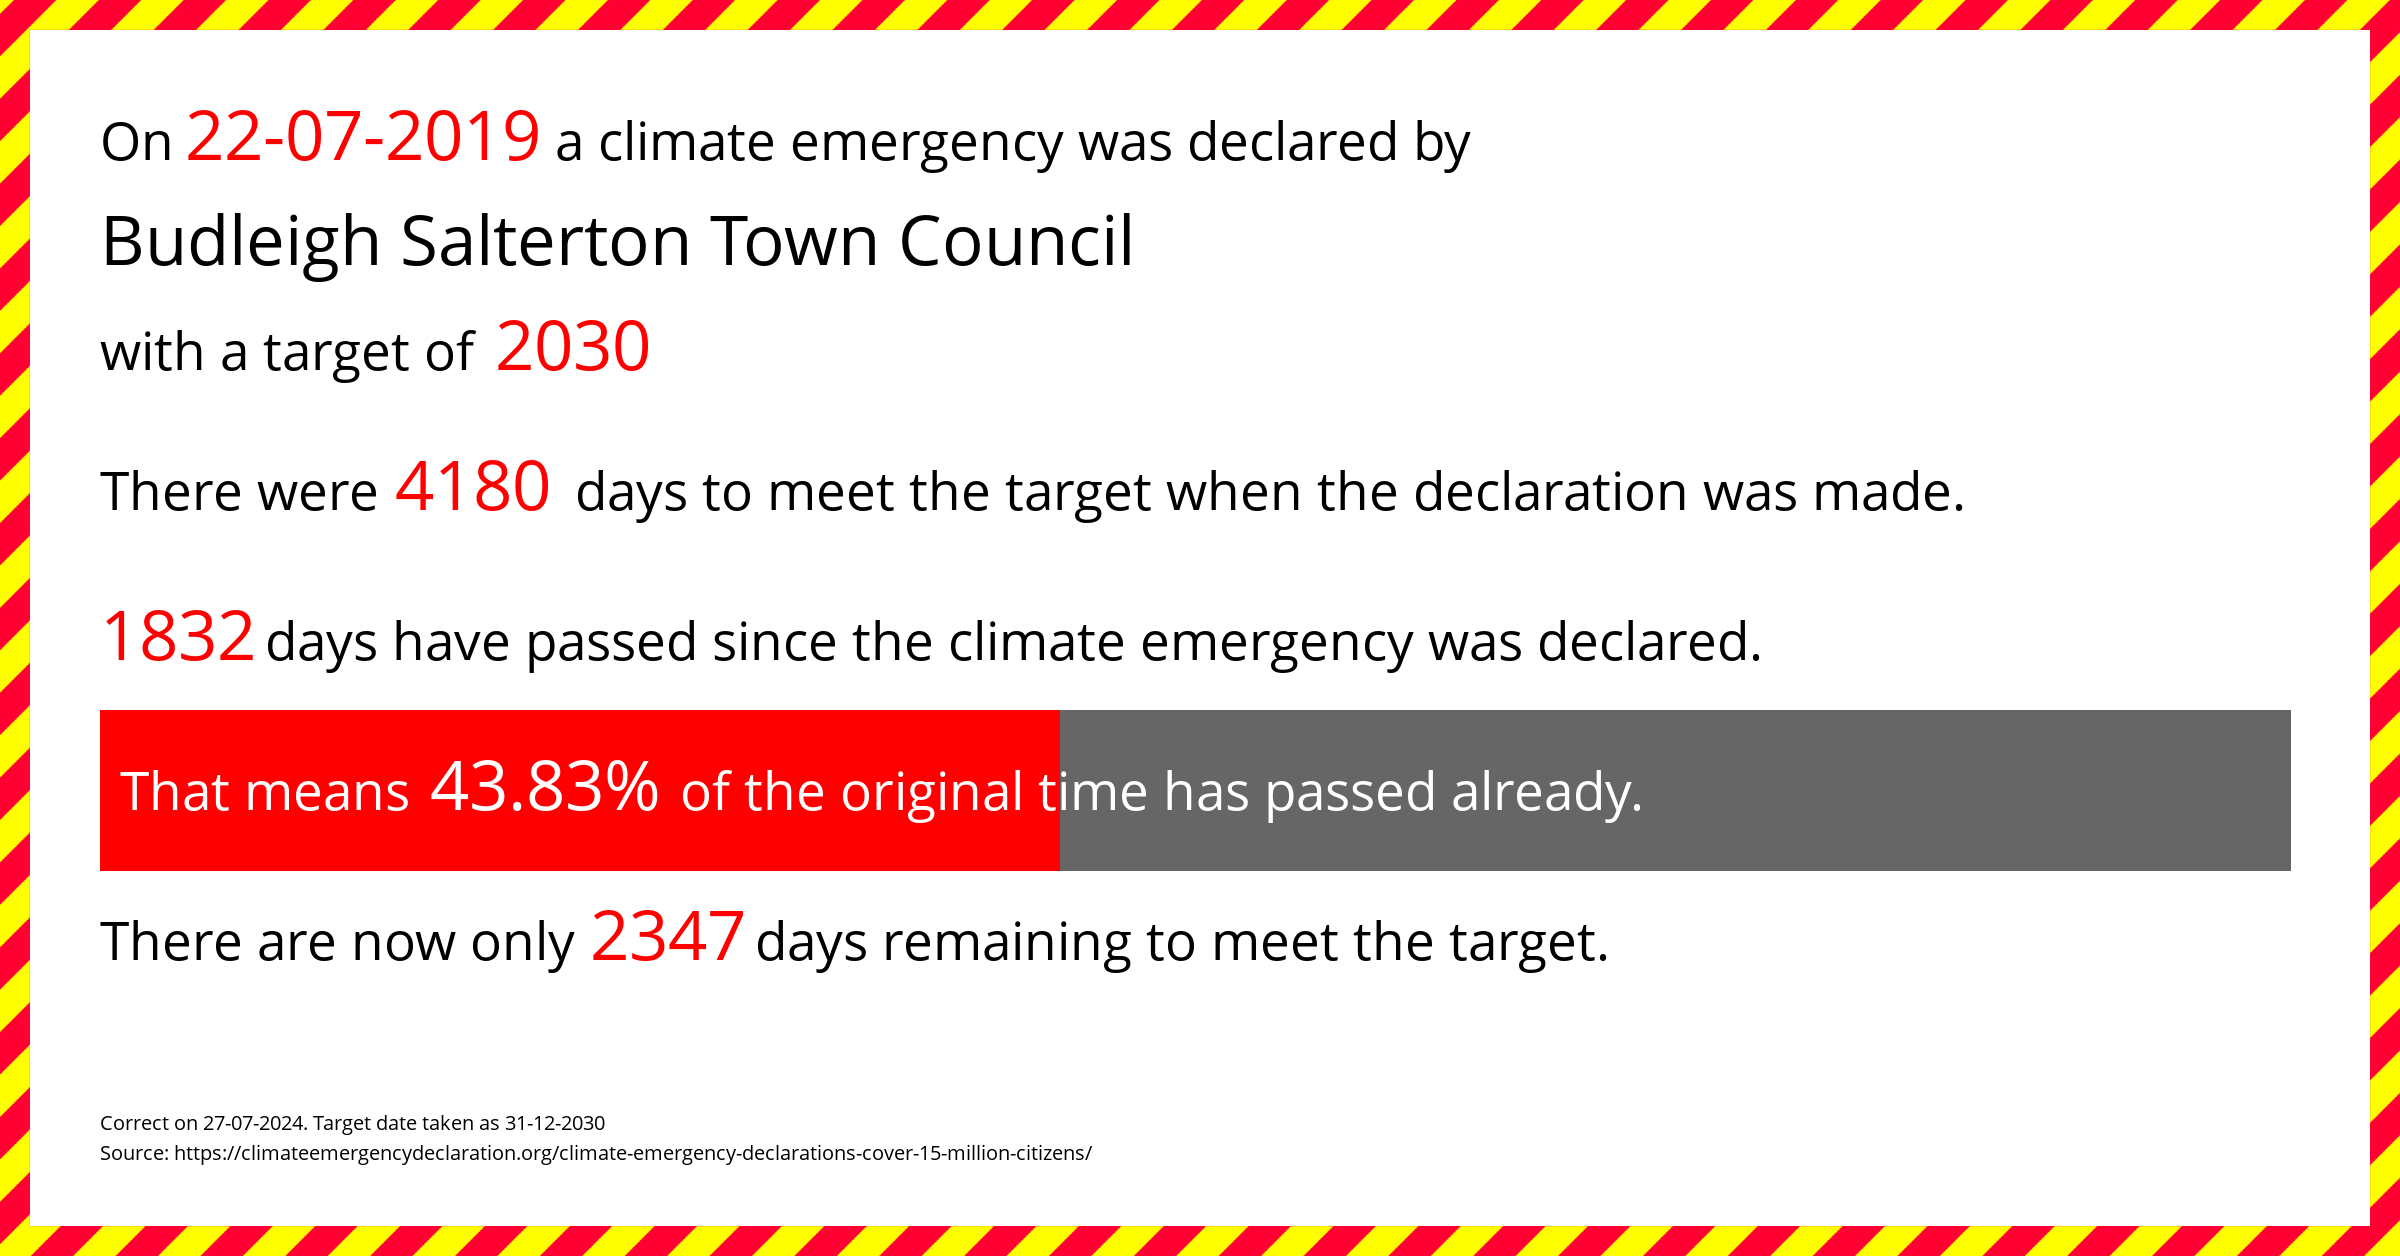 Budleigh Salterton Town Council declared a Climate emergency on Monday 22nd July 2019, with a target of 2030.